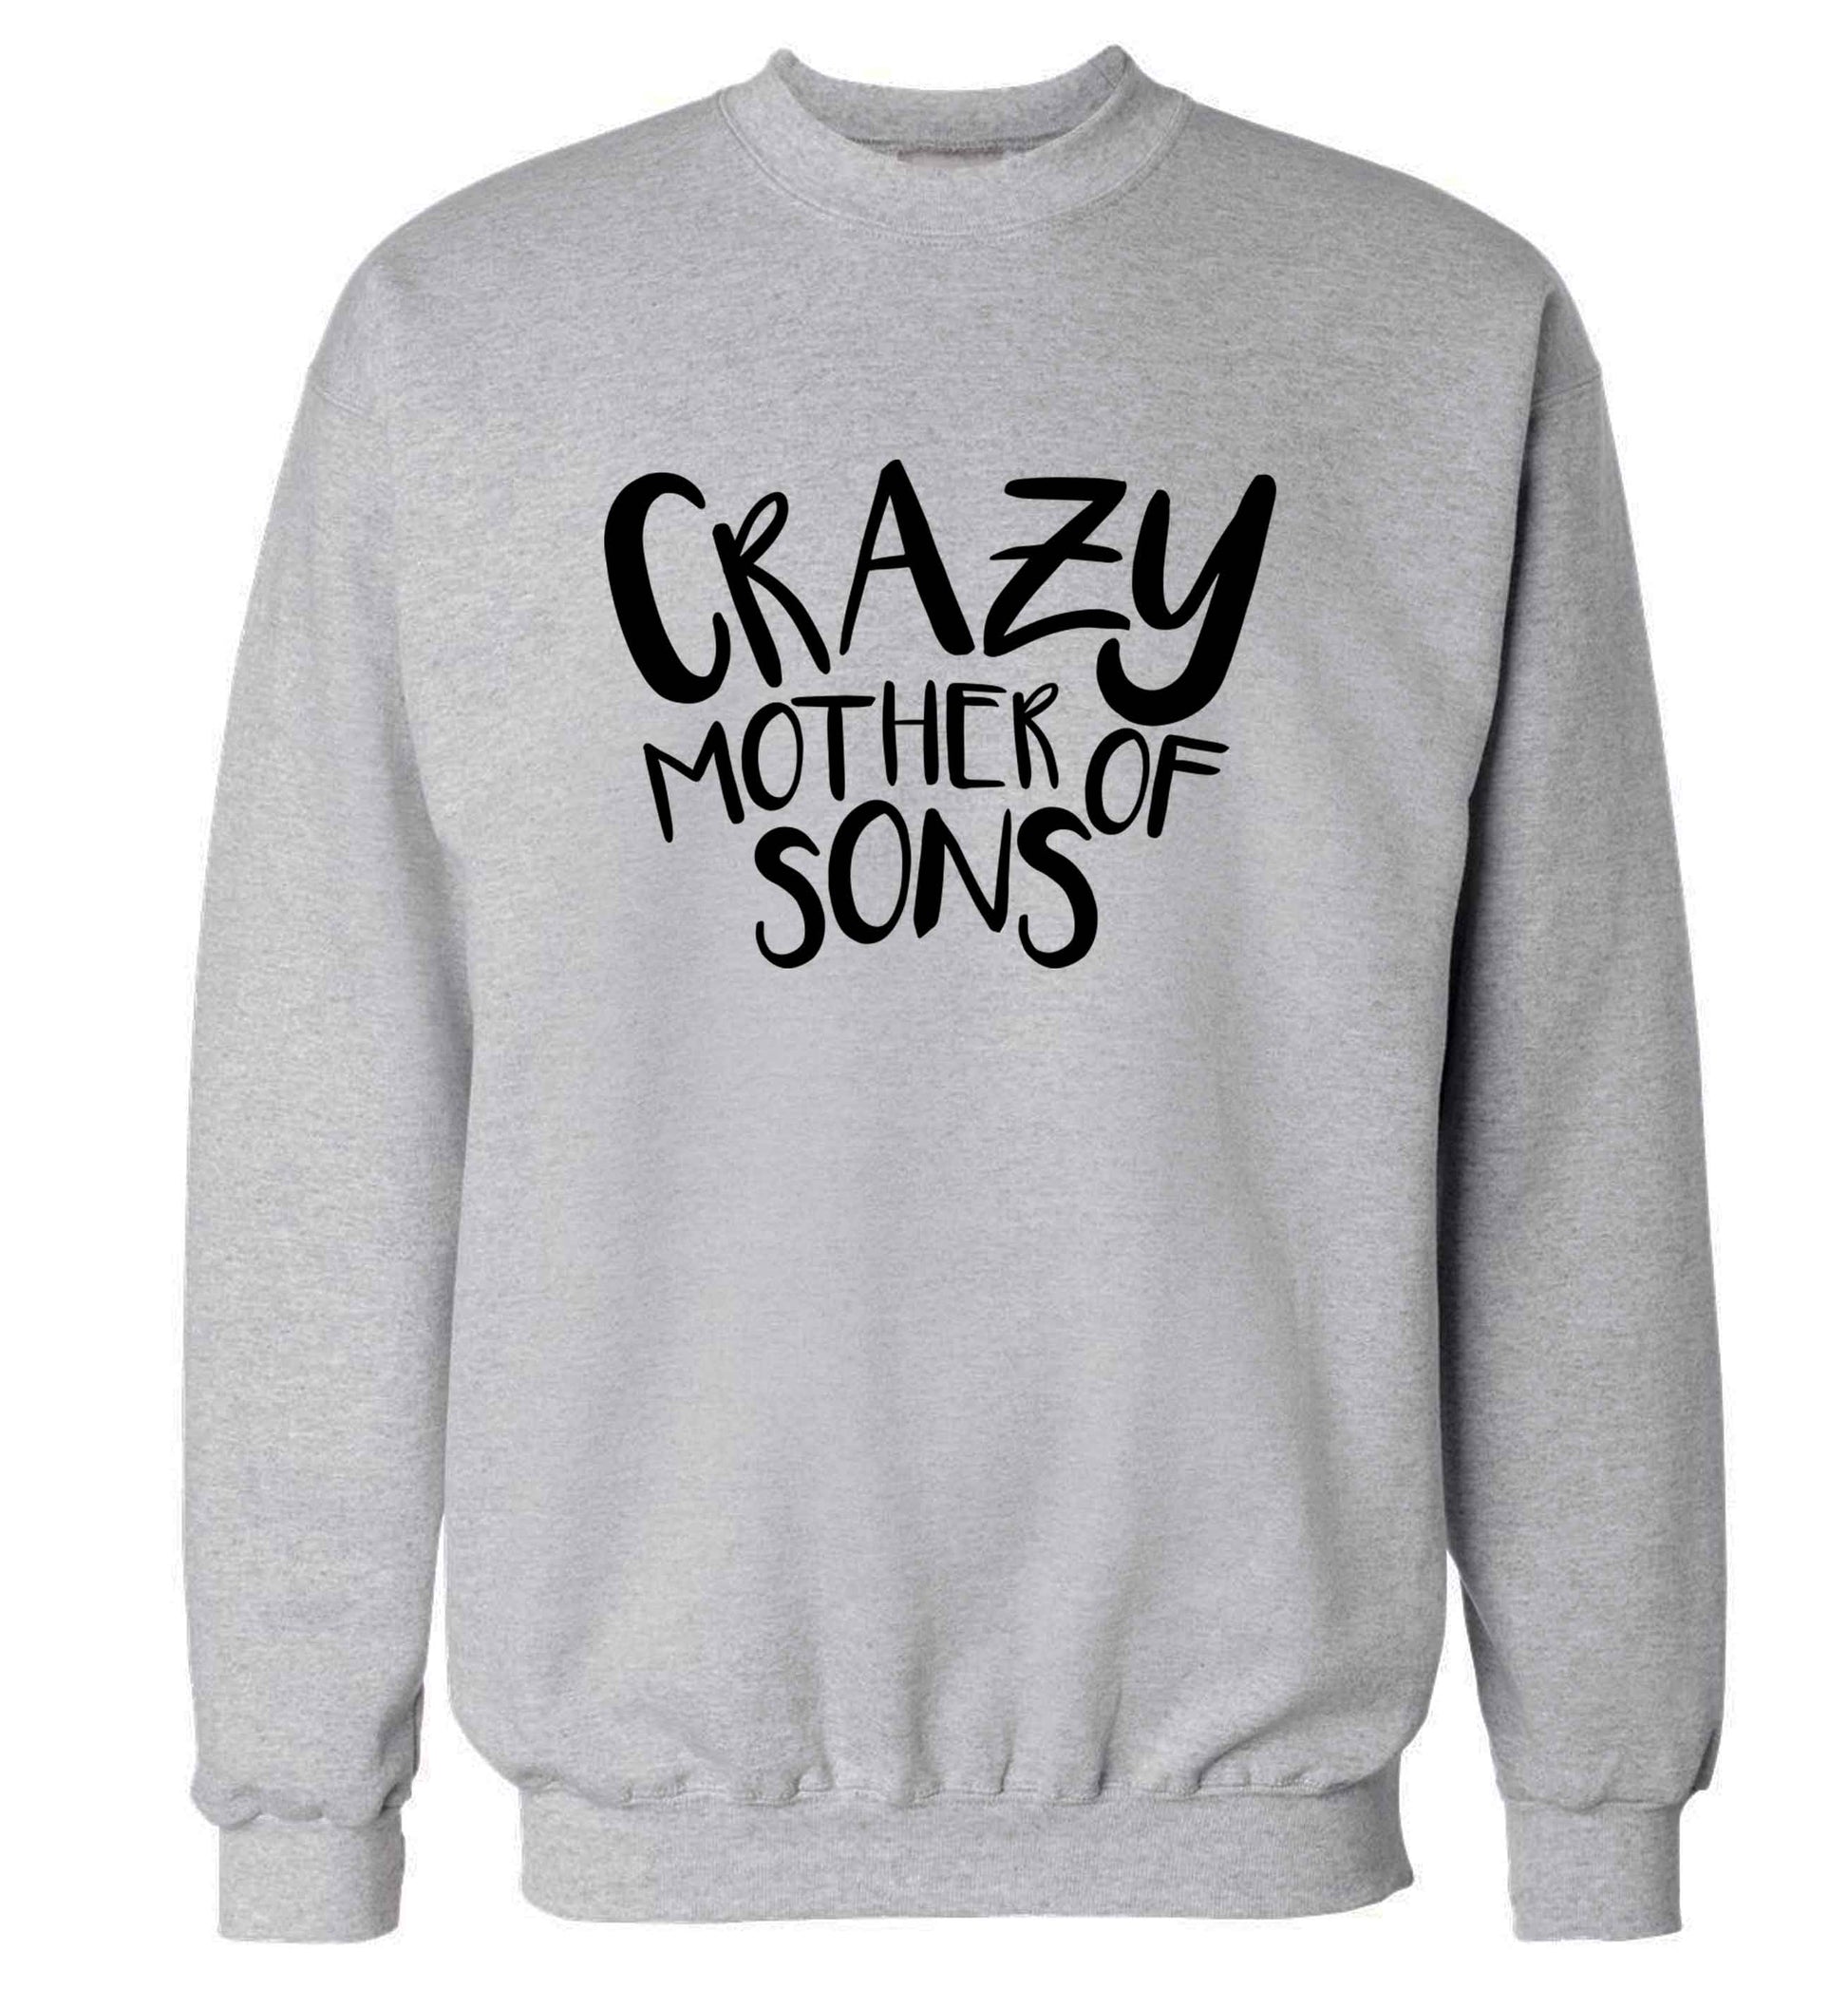 Crazy mother of sons adult's unisex grey sweater 2XL